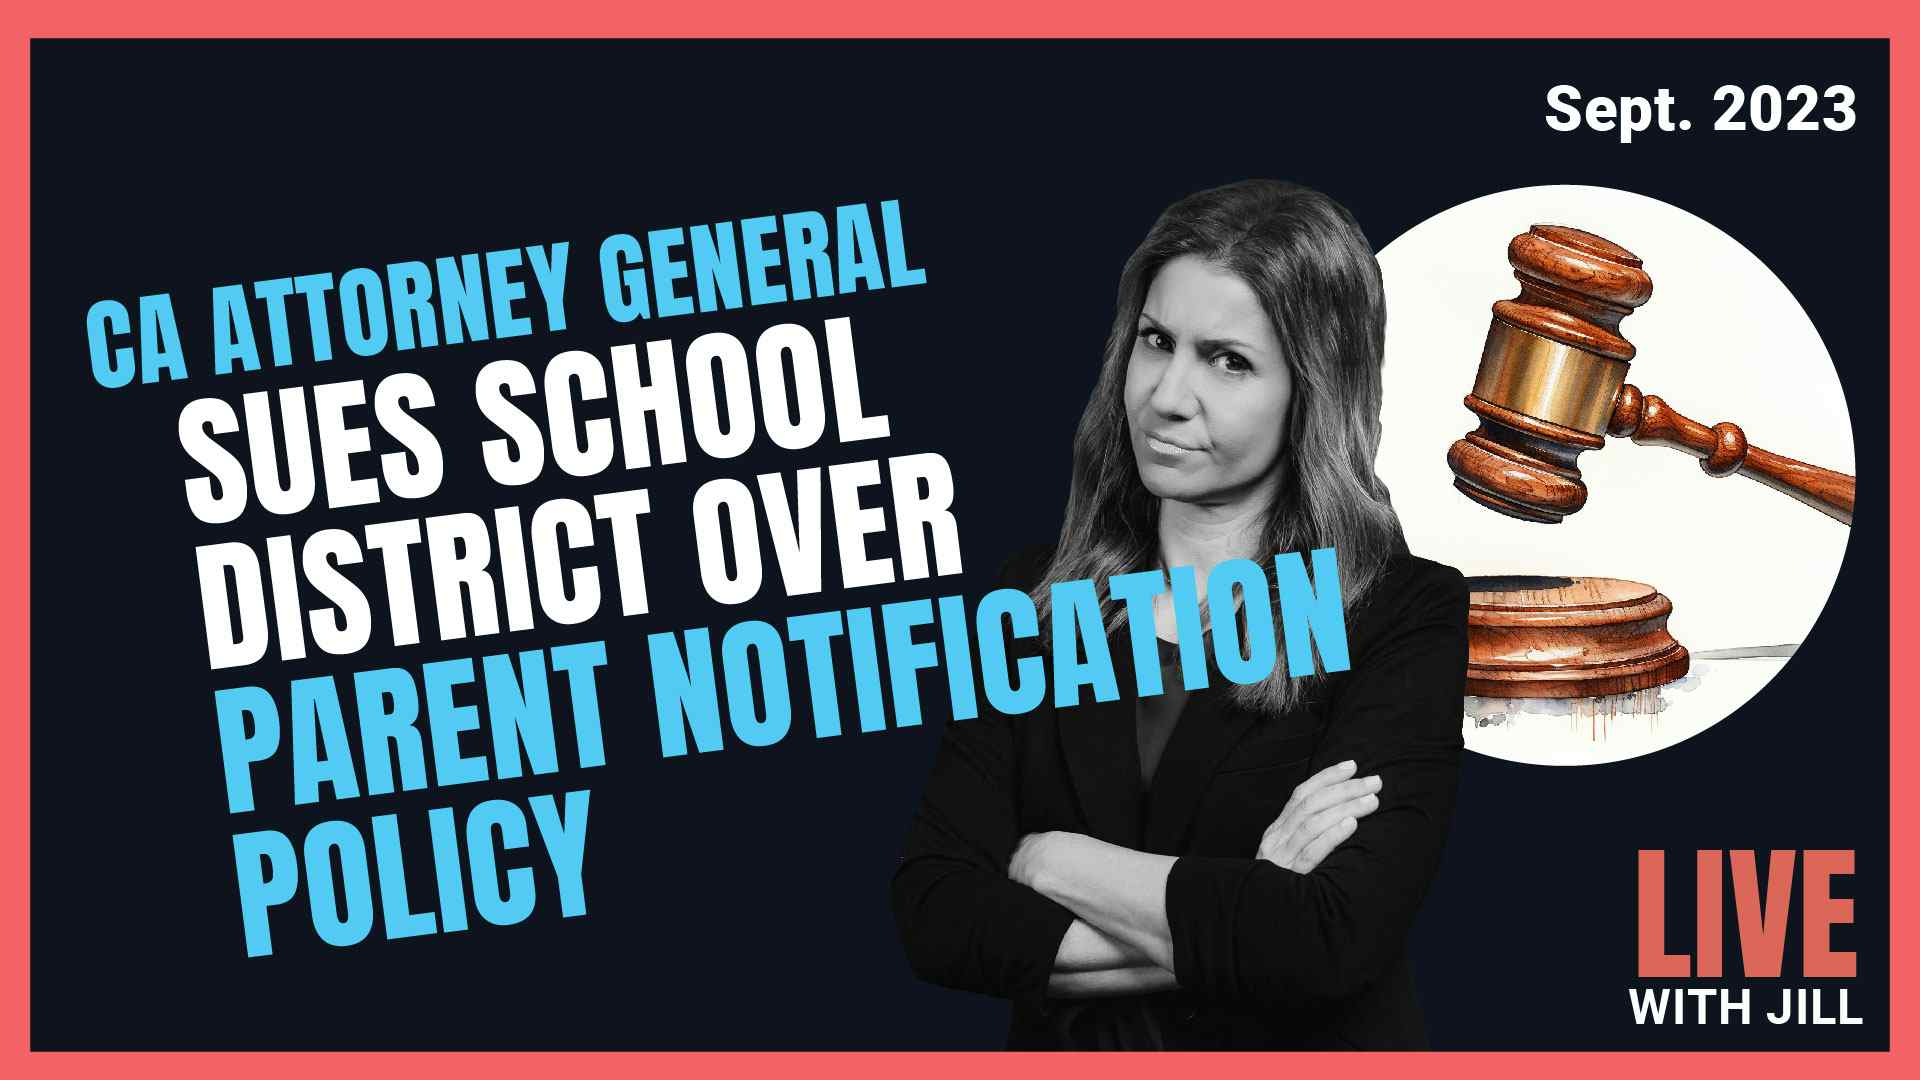 CA Attorney General Sues School District over Parent Notification Policy